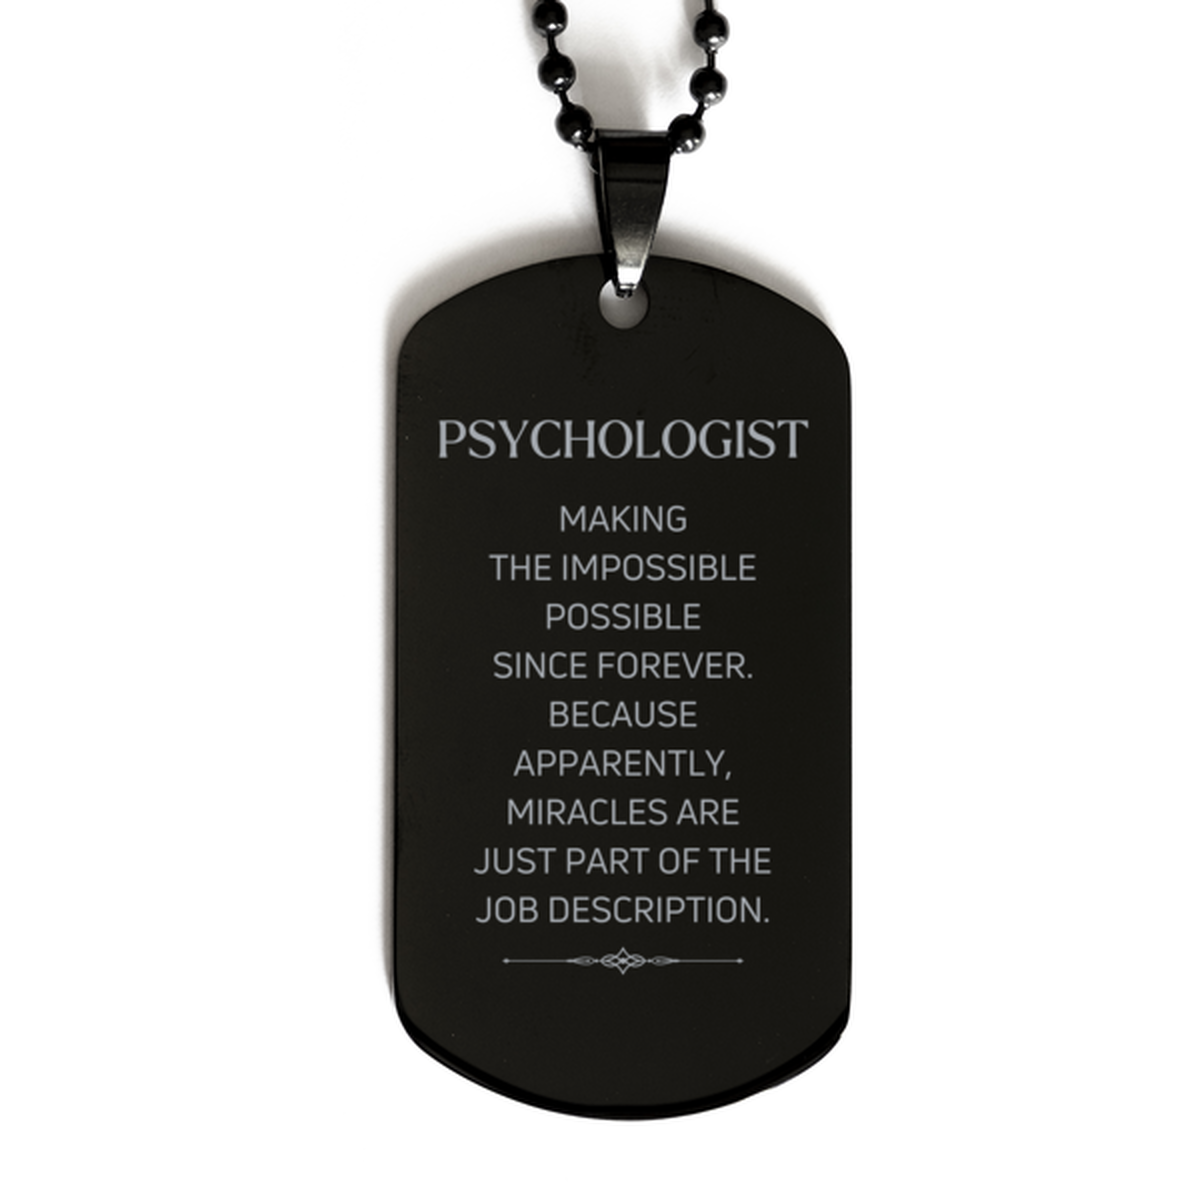 Funny Psychologist Gifts, Miracles are just part of the job description, Inspirational Birthday Black Dog Tag For Psychologist, Men, Women, Coworkers, Friends, Boss